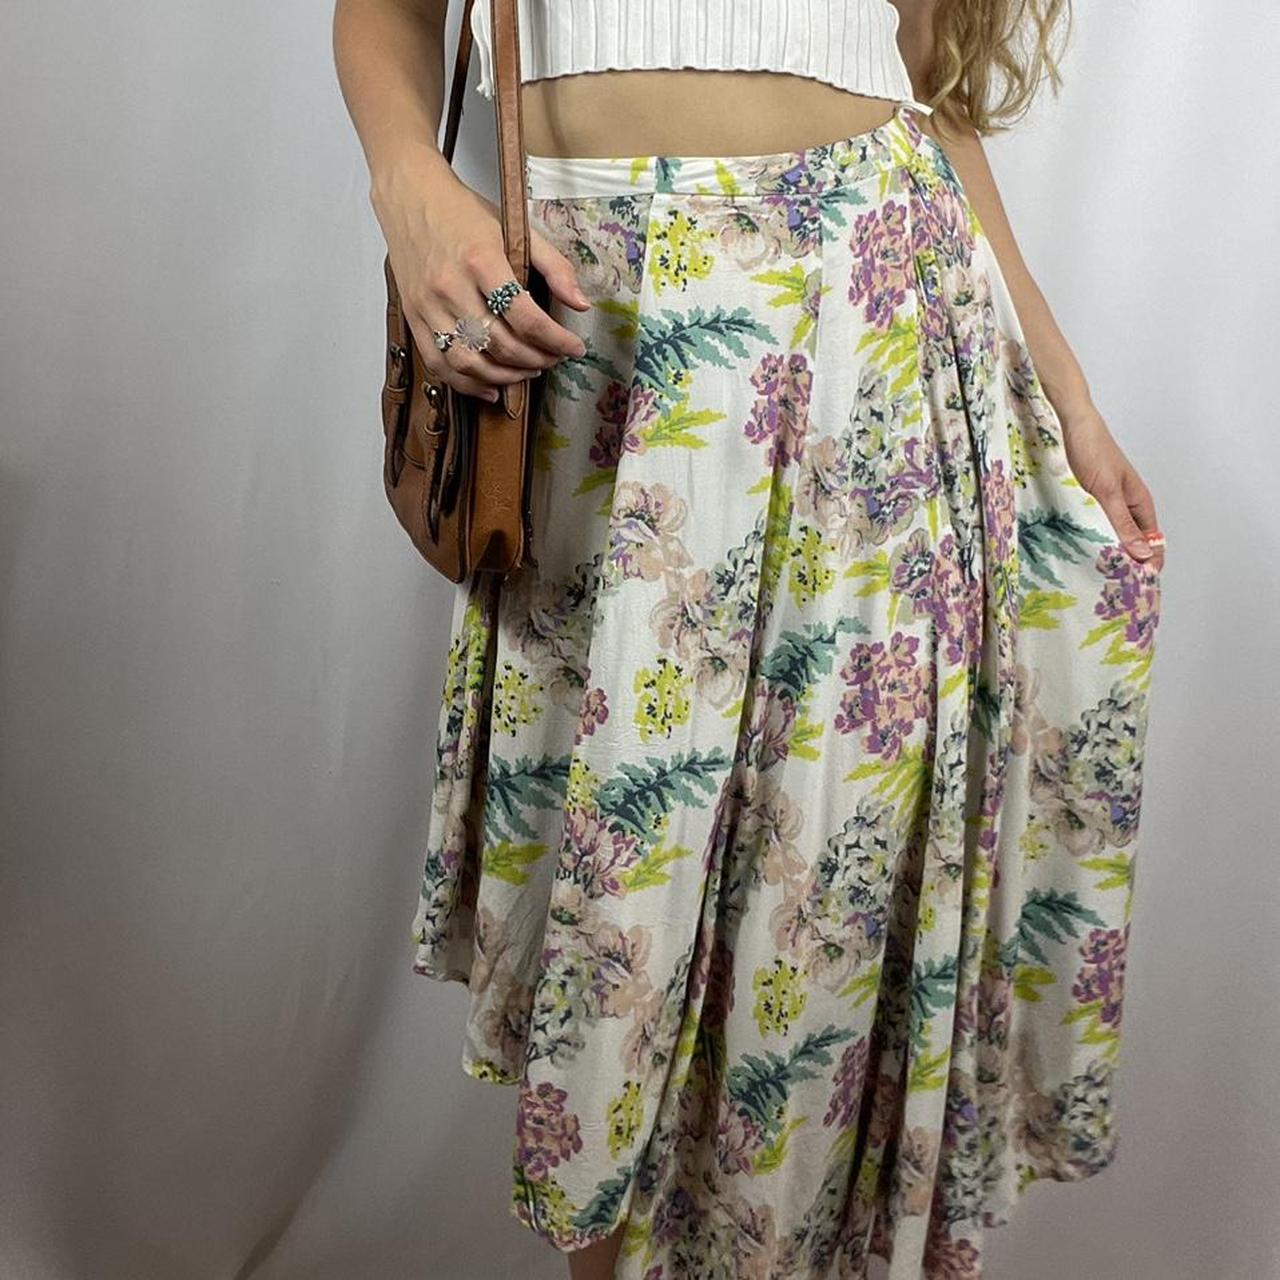 Product Image 3 - Floral skirt 
- Womens 2